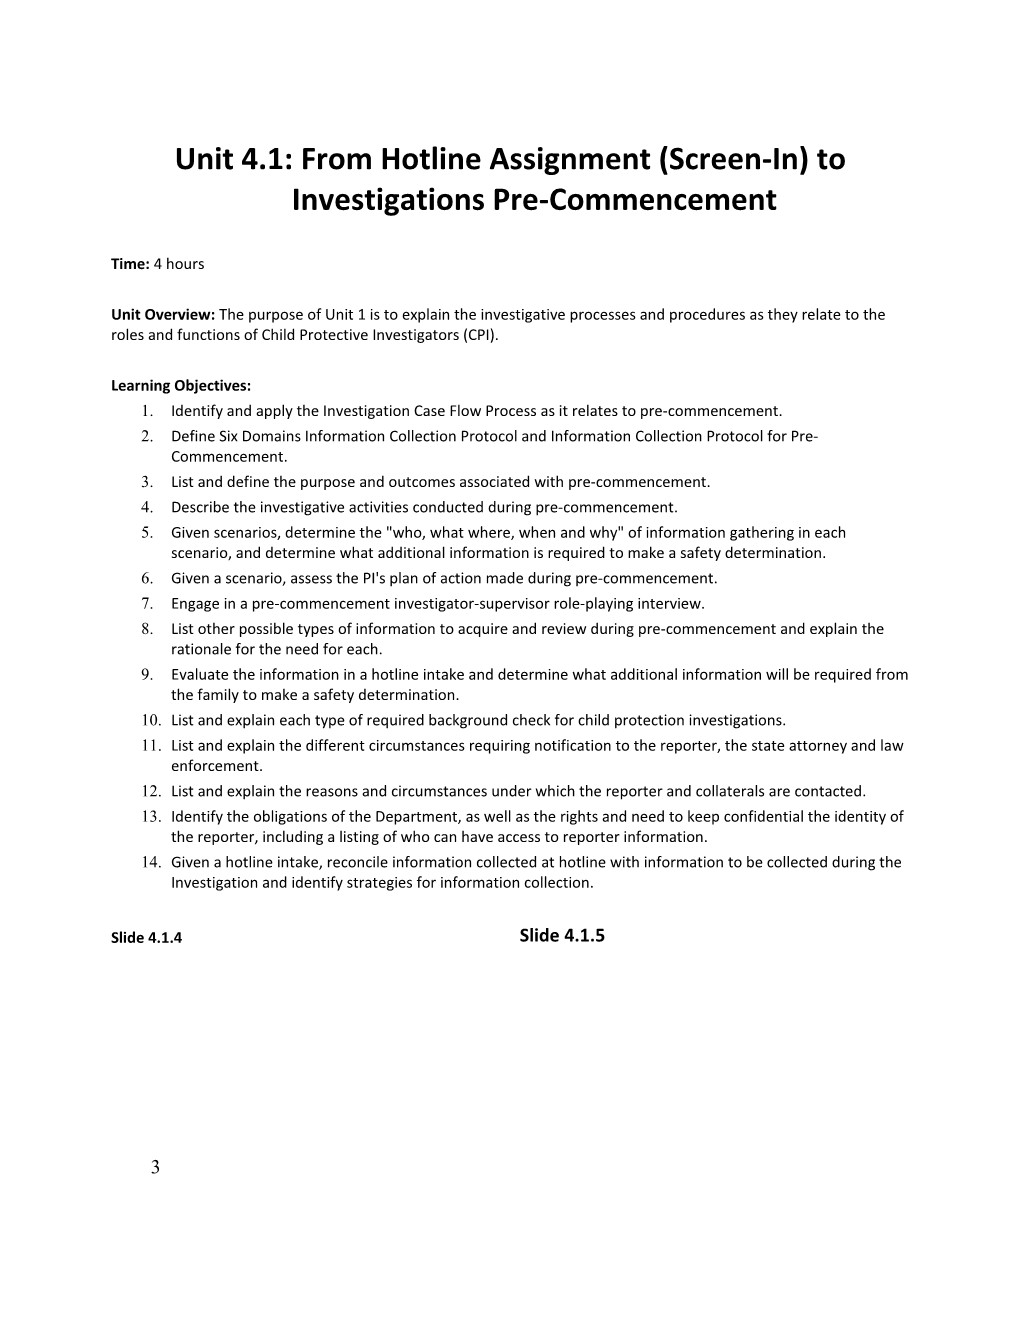 Identify and Apply the Investigation Case Flow Process As It Relates to Pre-Commencement